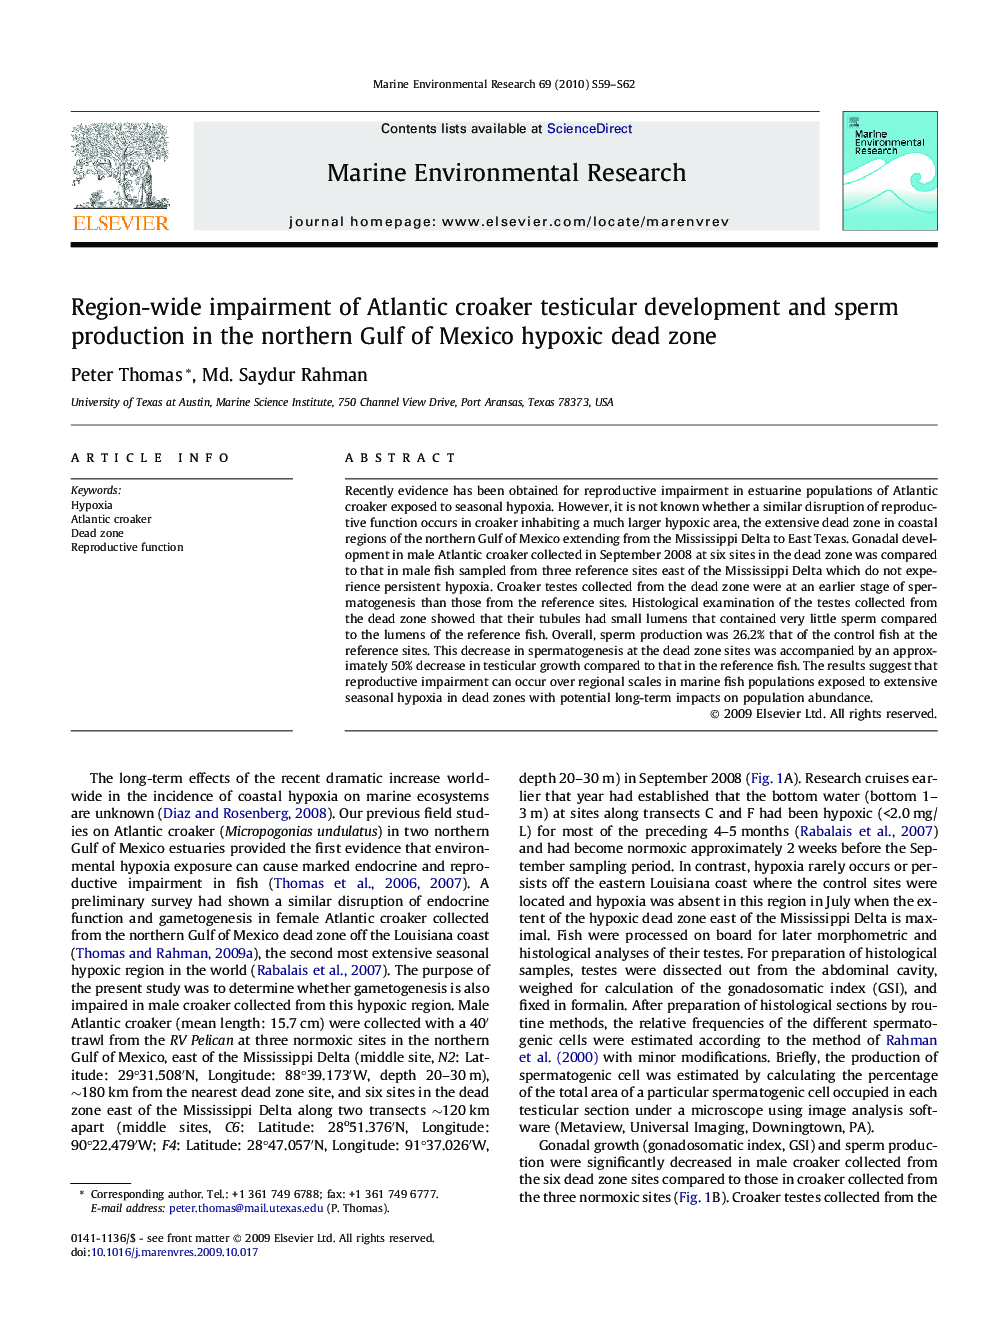 Region-wide impairment of Atlantic croaker testicular development and sperm production in the northern Gulf of Mexico hypoxic dead zone